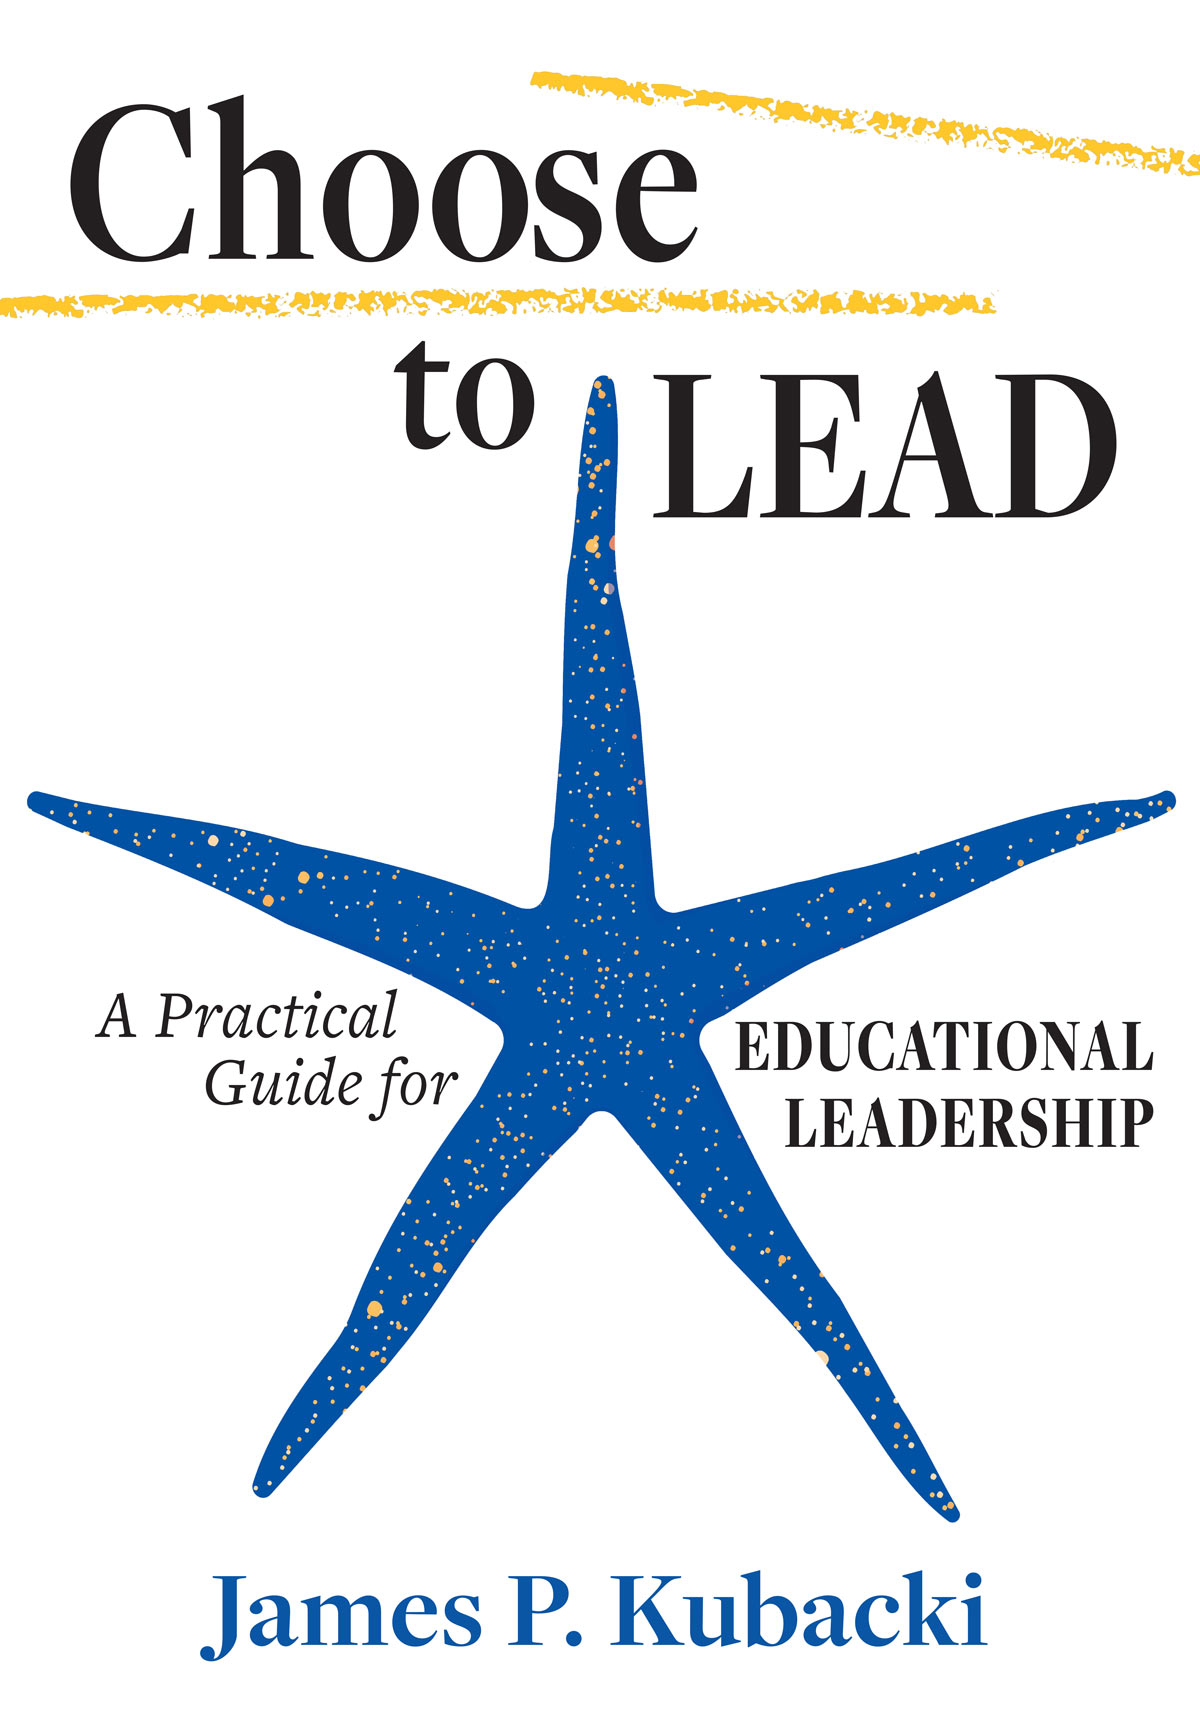 Choose to Lead book cover